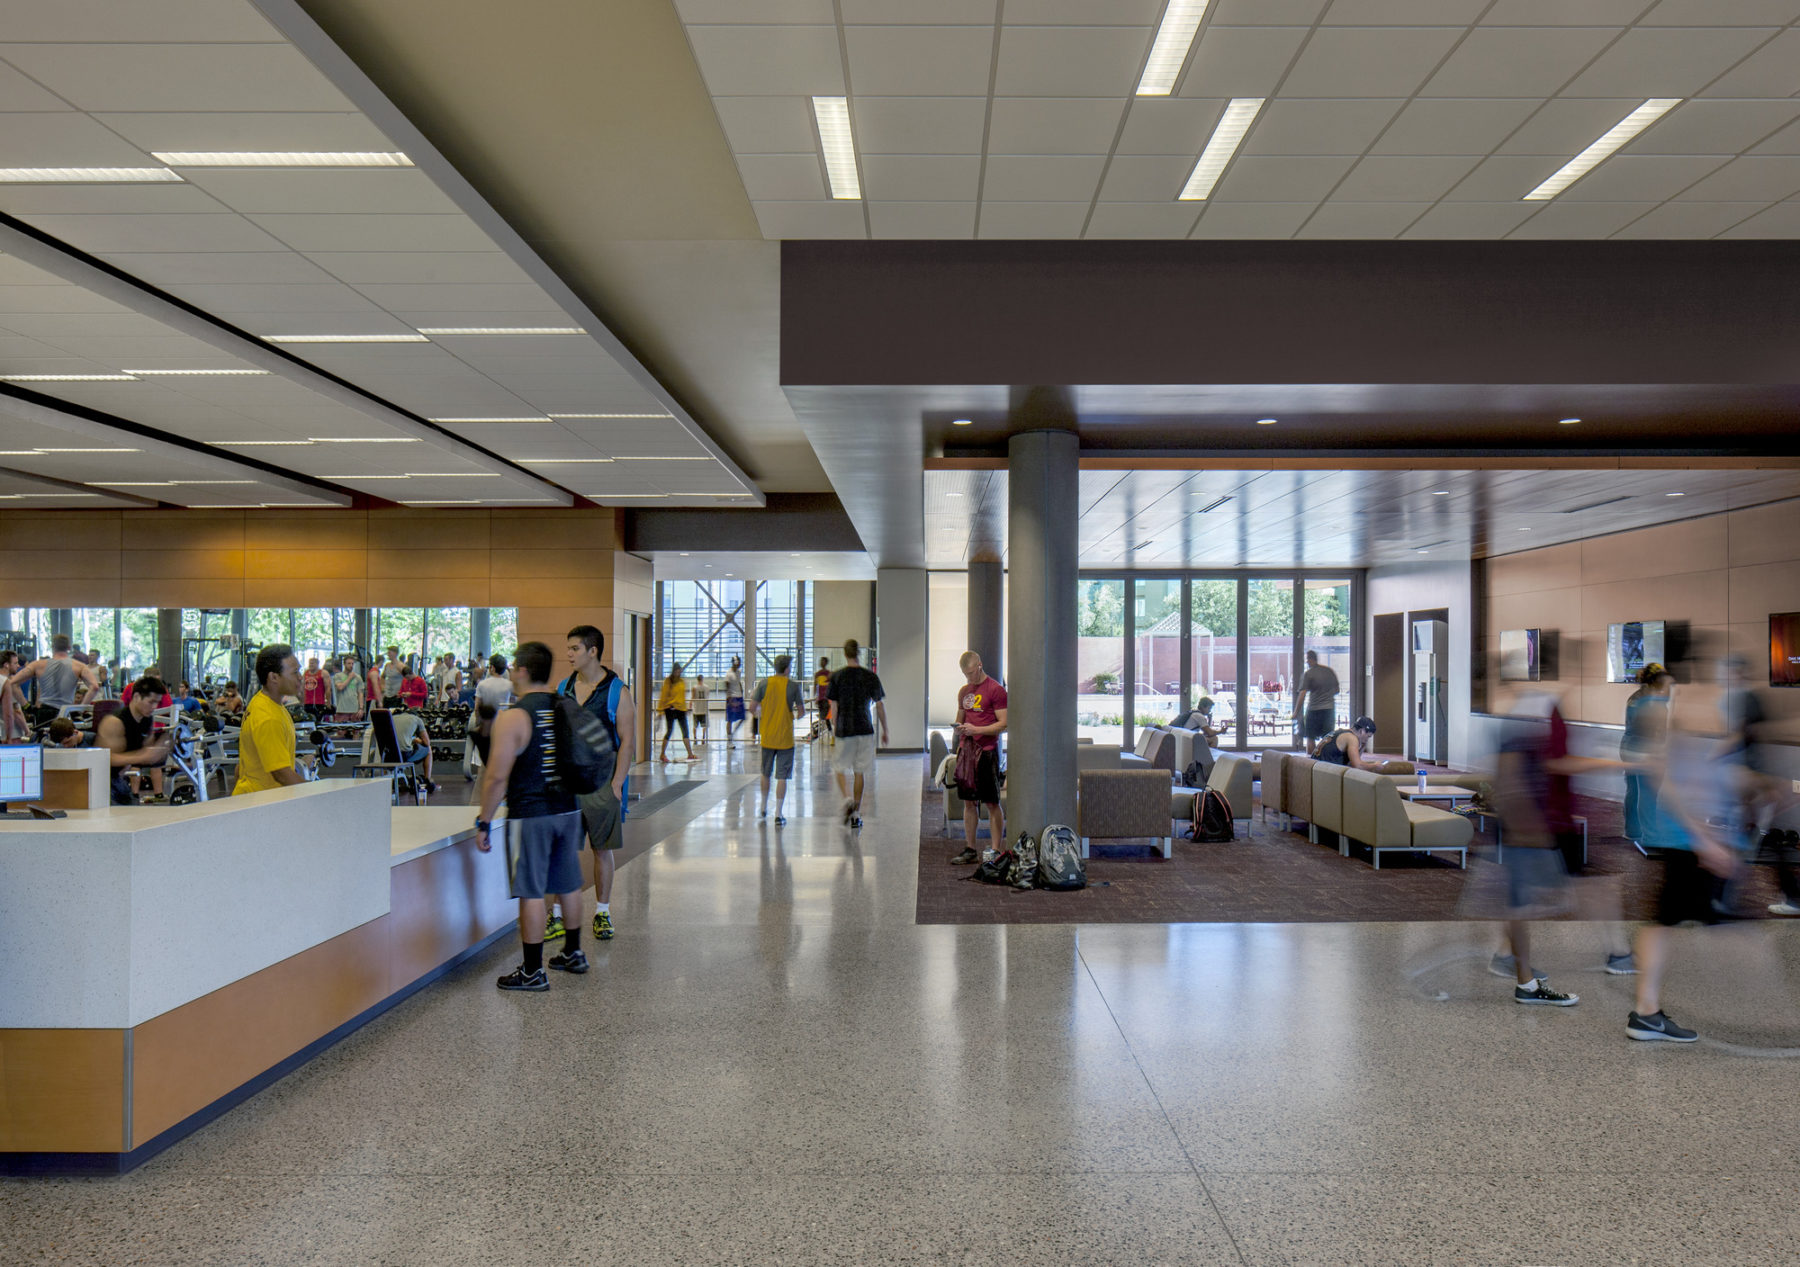 Students in the complex lobby